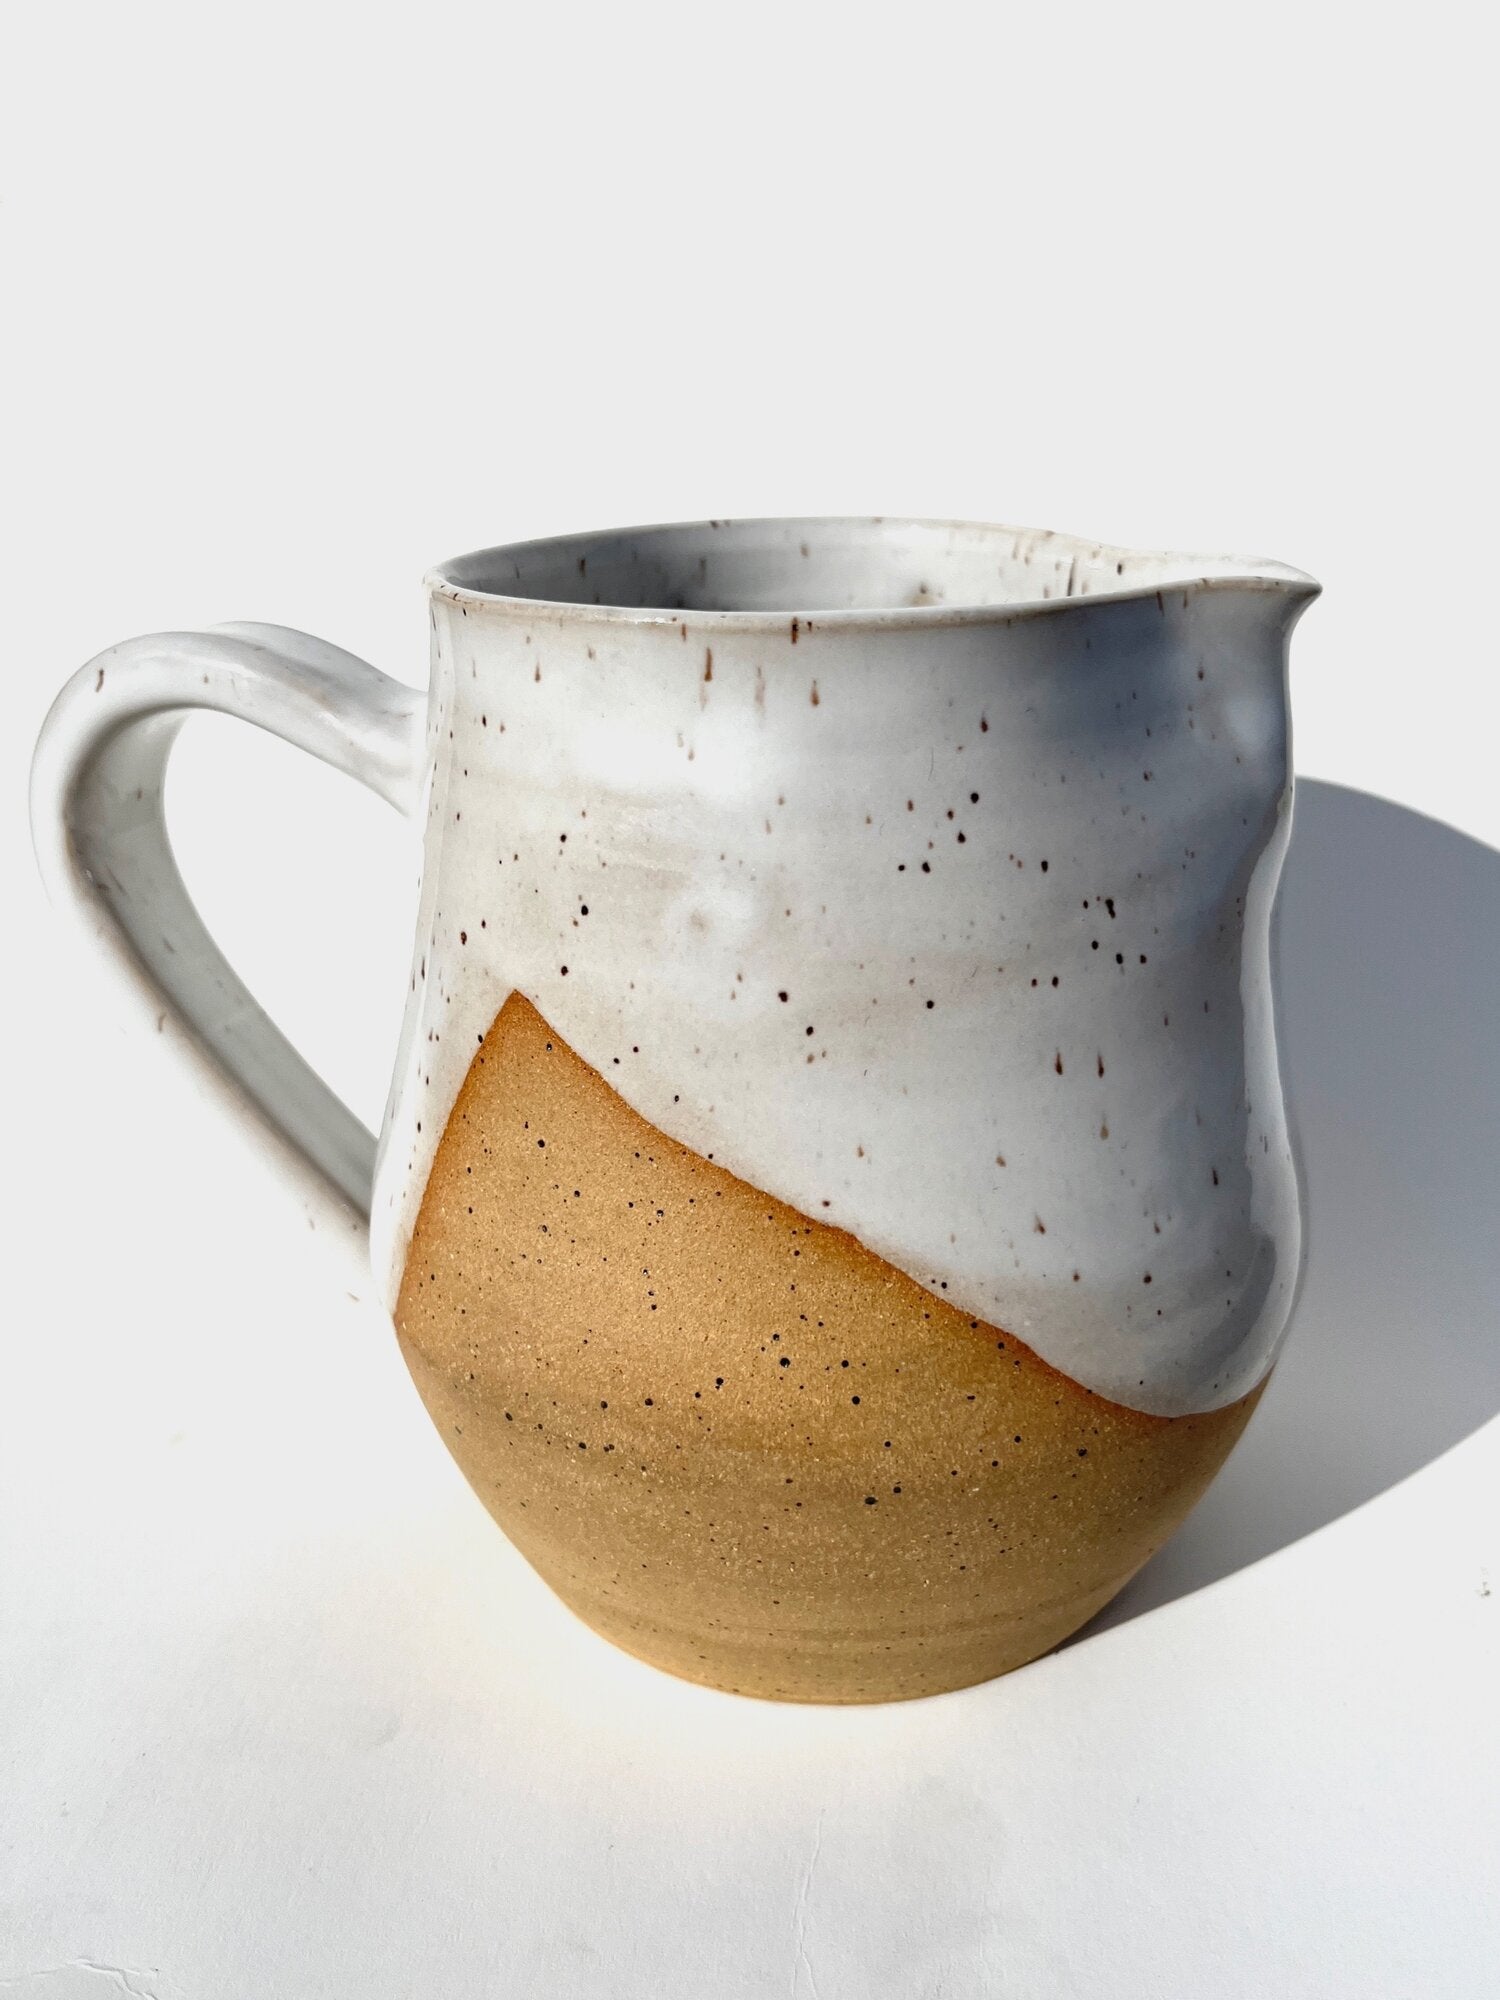 Inspired by the snowfall on the dry landscapes of western Colorado. This pitcher is perfect for 4 mugs of coffee, tea, lemonade, or sangria! When you're not using it for drinks, fill it with some fresh cut flowers.